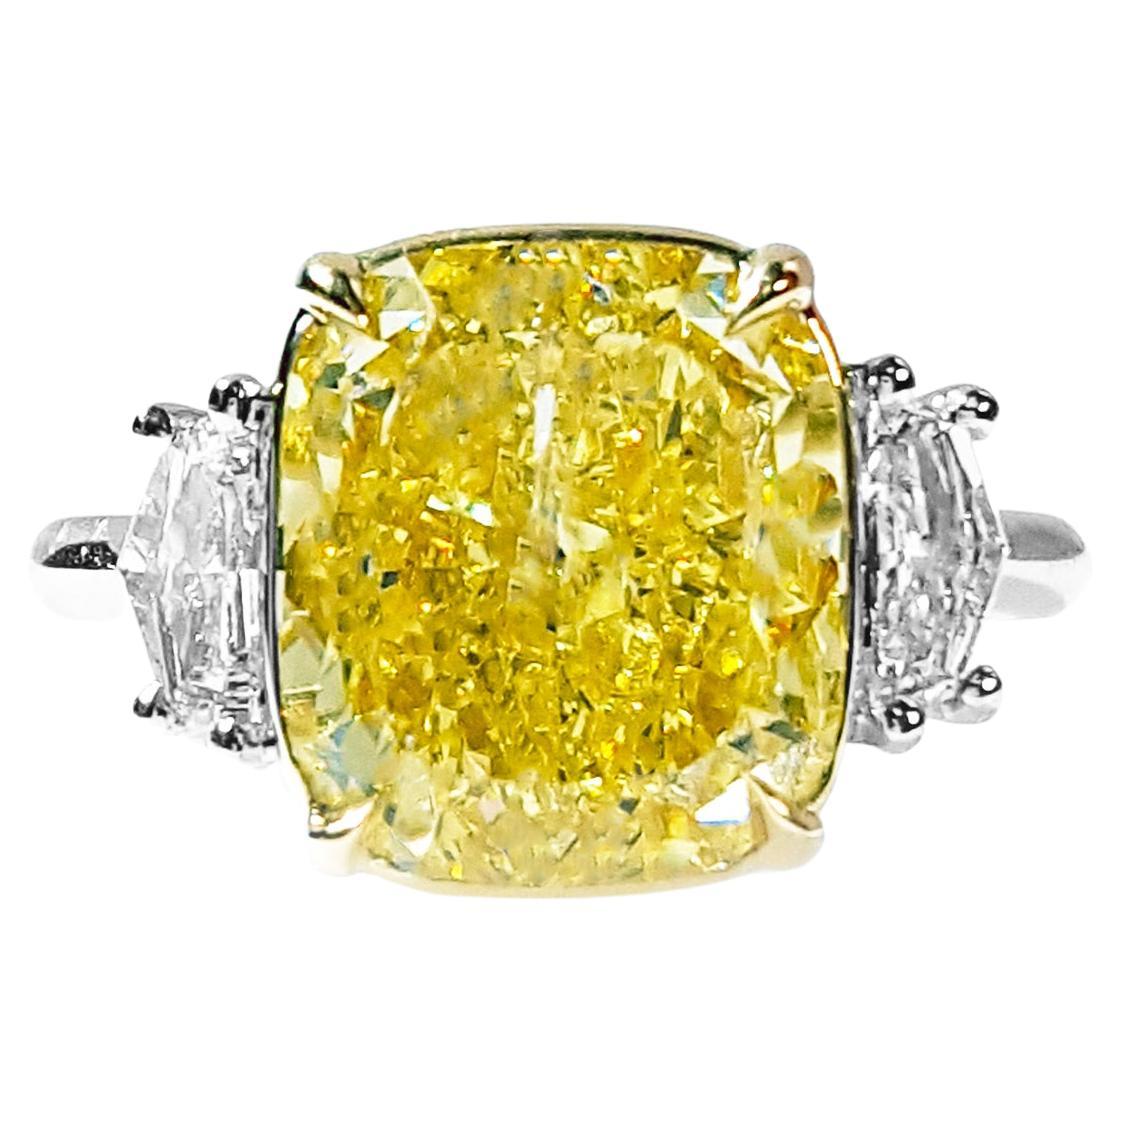 6.50 Carat Fancy Intense Yellow Diamond Engagement Ring in Platinum, GIA Report For Sale